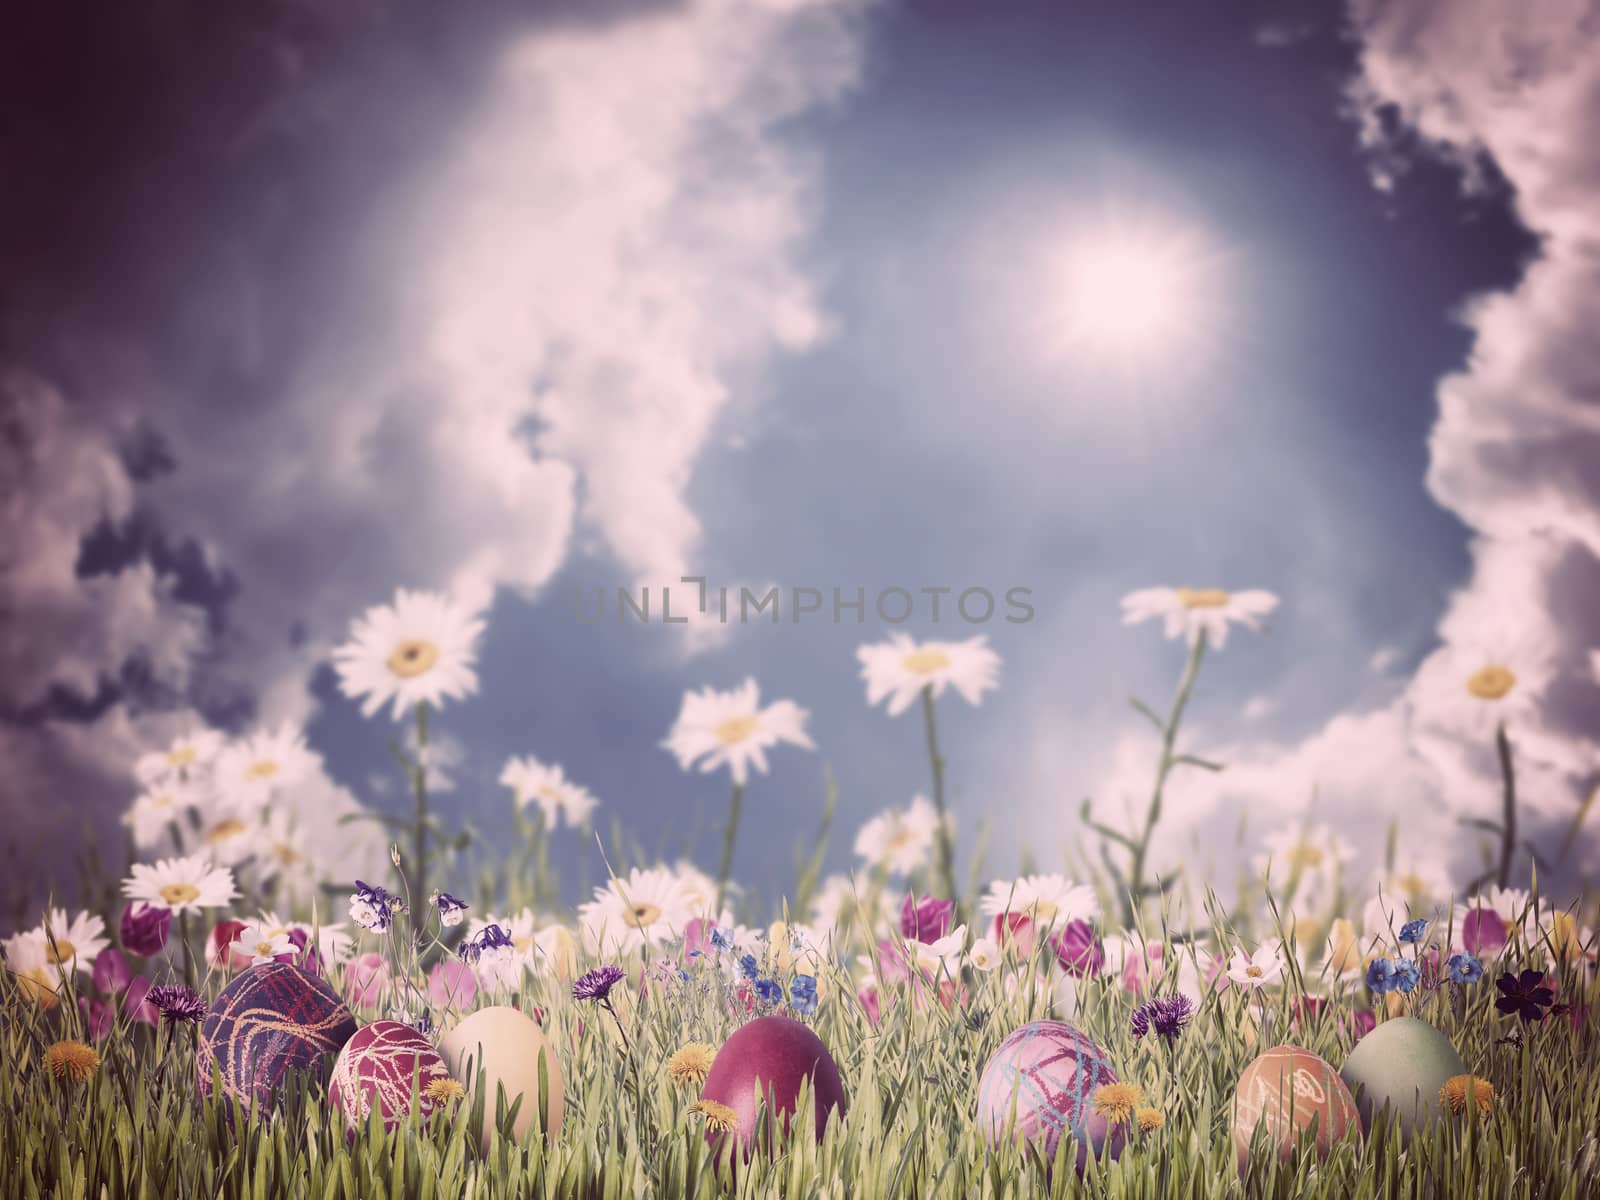 Easter vintage nature holiday background with eggs and flowers